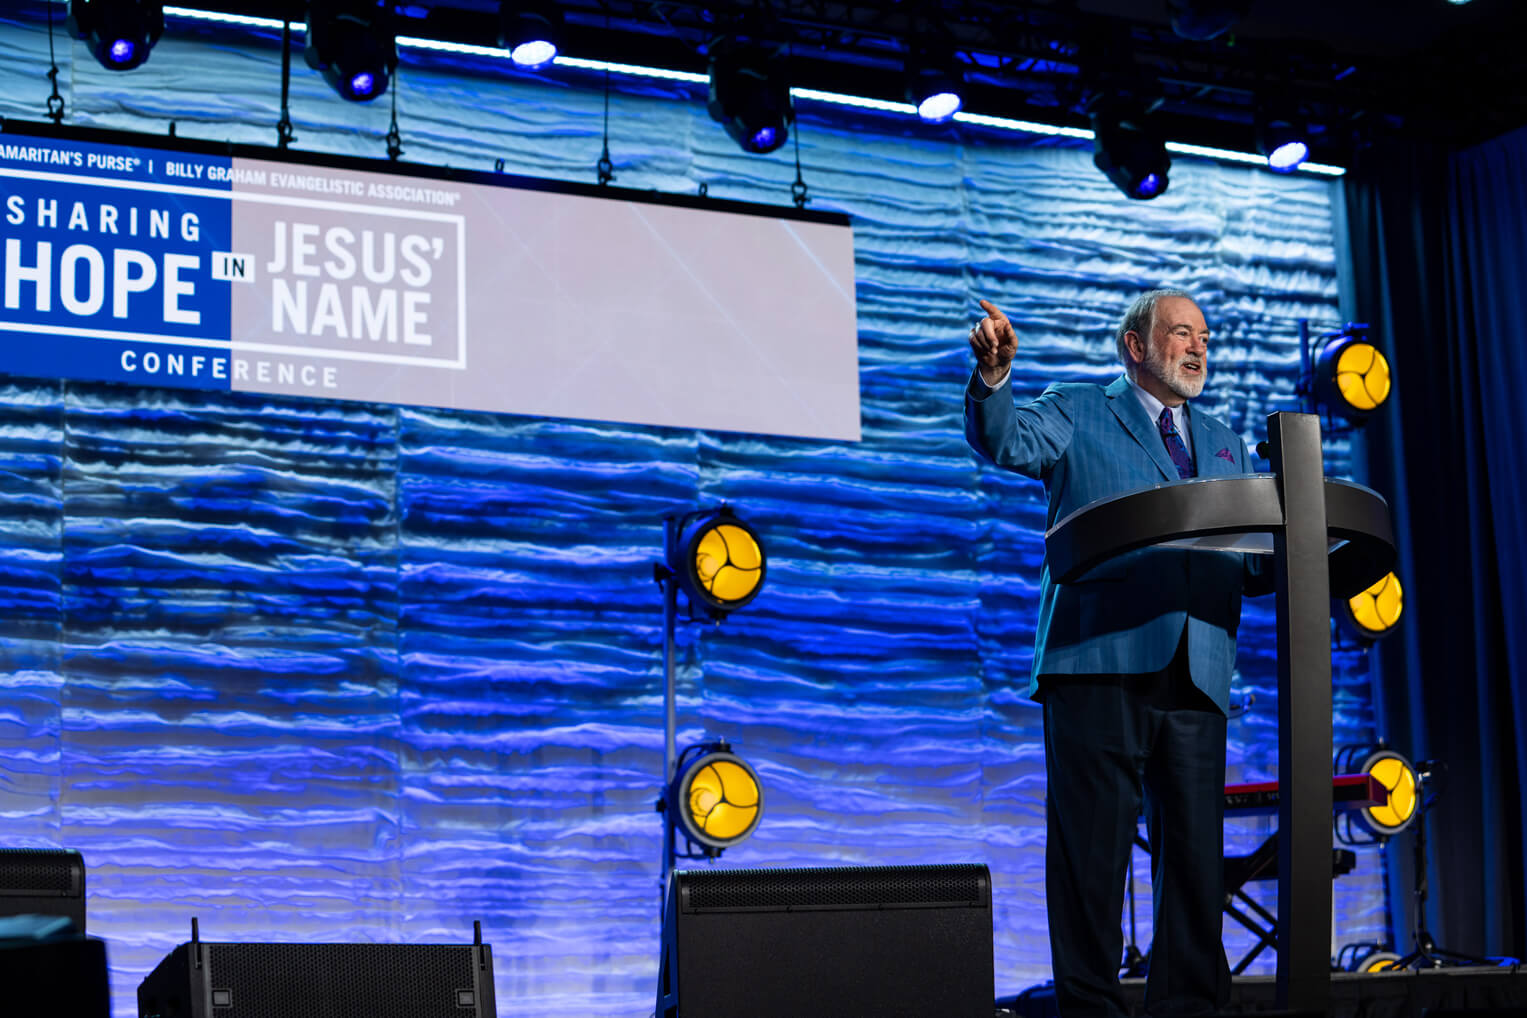 Mike Huckabee encouraged volunteers and chaplains with stories of God's work in difficult times.